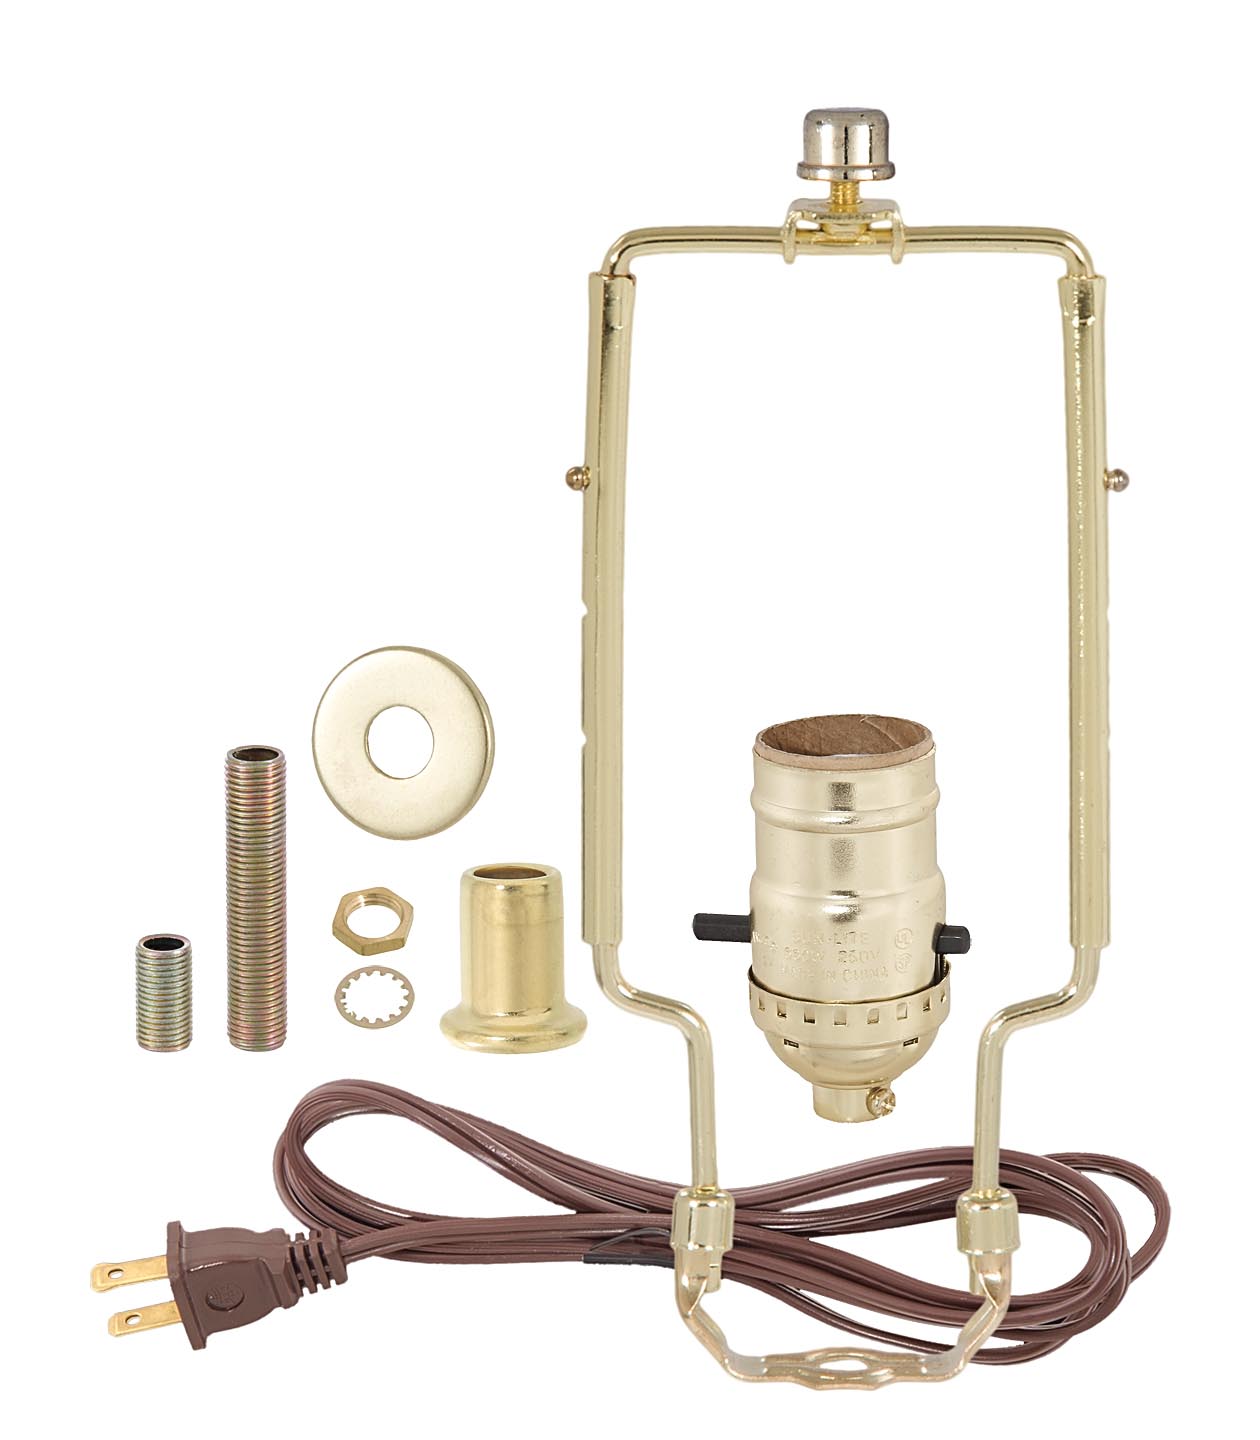 Table Lamp Wiring Kit with Push-Thru Socket, Adjustable Harp, and Brass Plated Finish